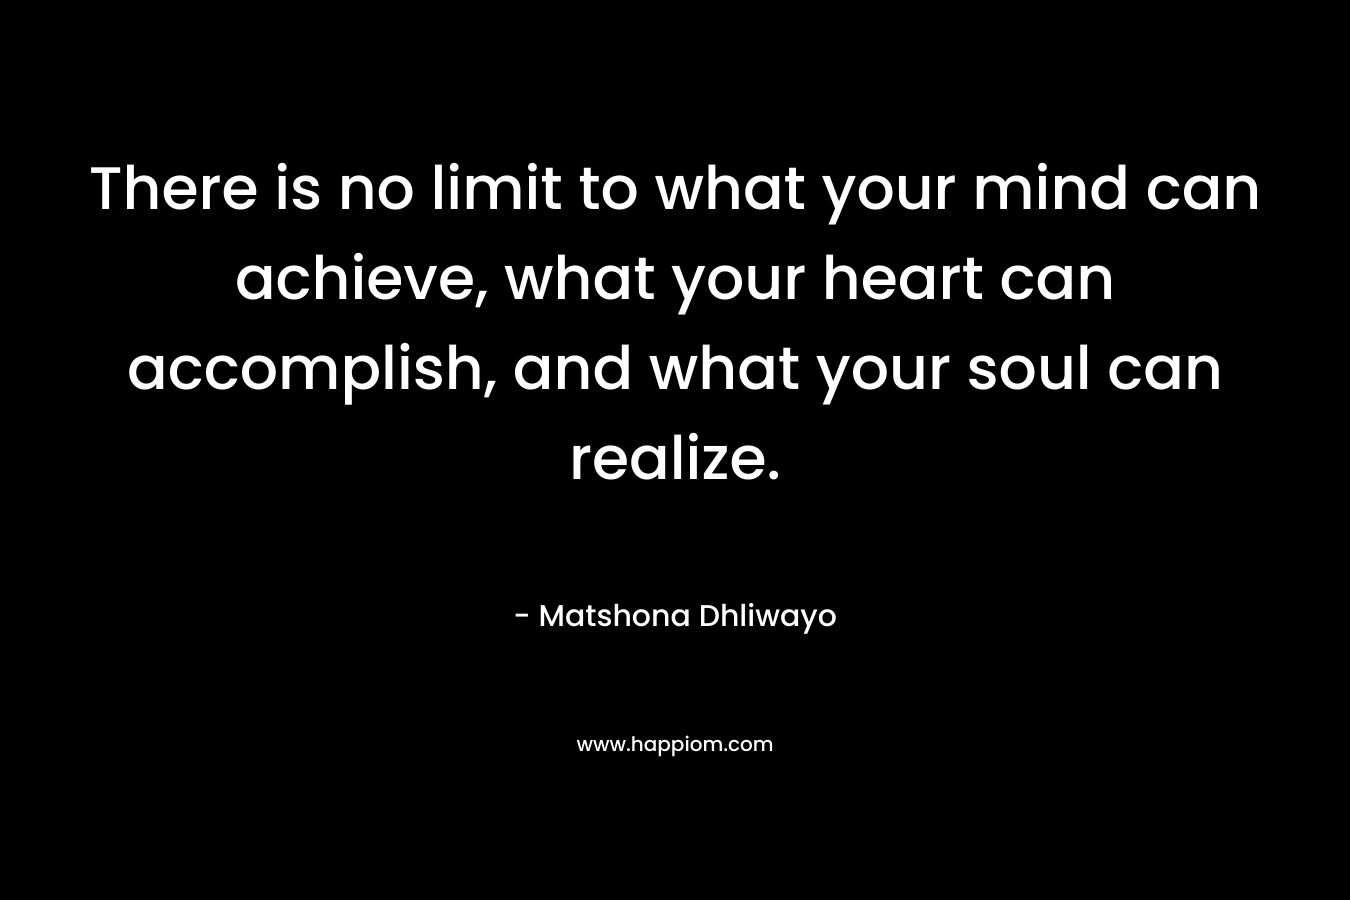 There is no limit to what your mind can achieve, what your heart can accomplish, and what your soul can realize.